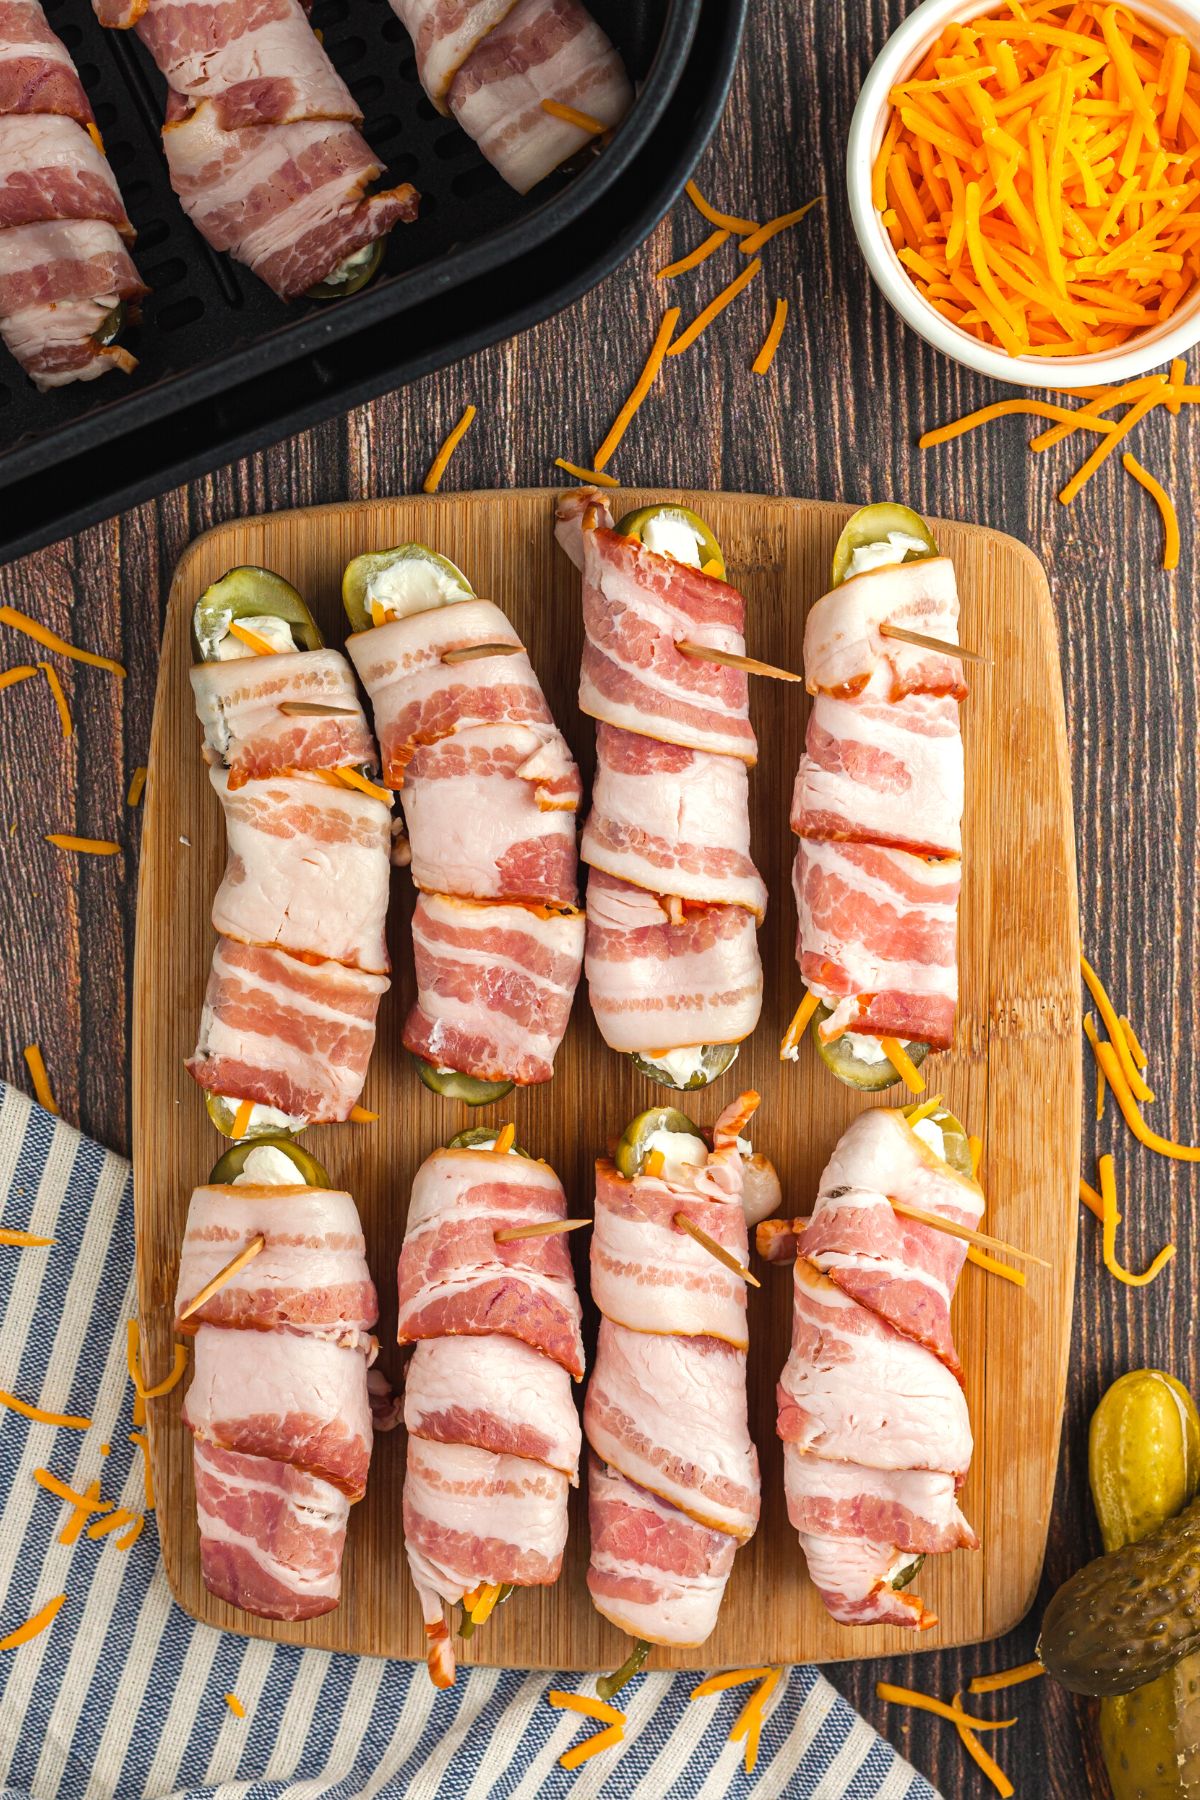 Pickle slices filled with cream and cheddar cheeses and wrapped in bacon slices